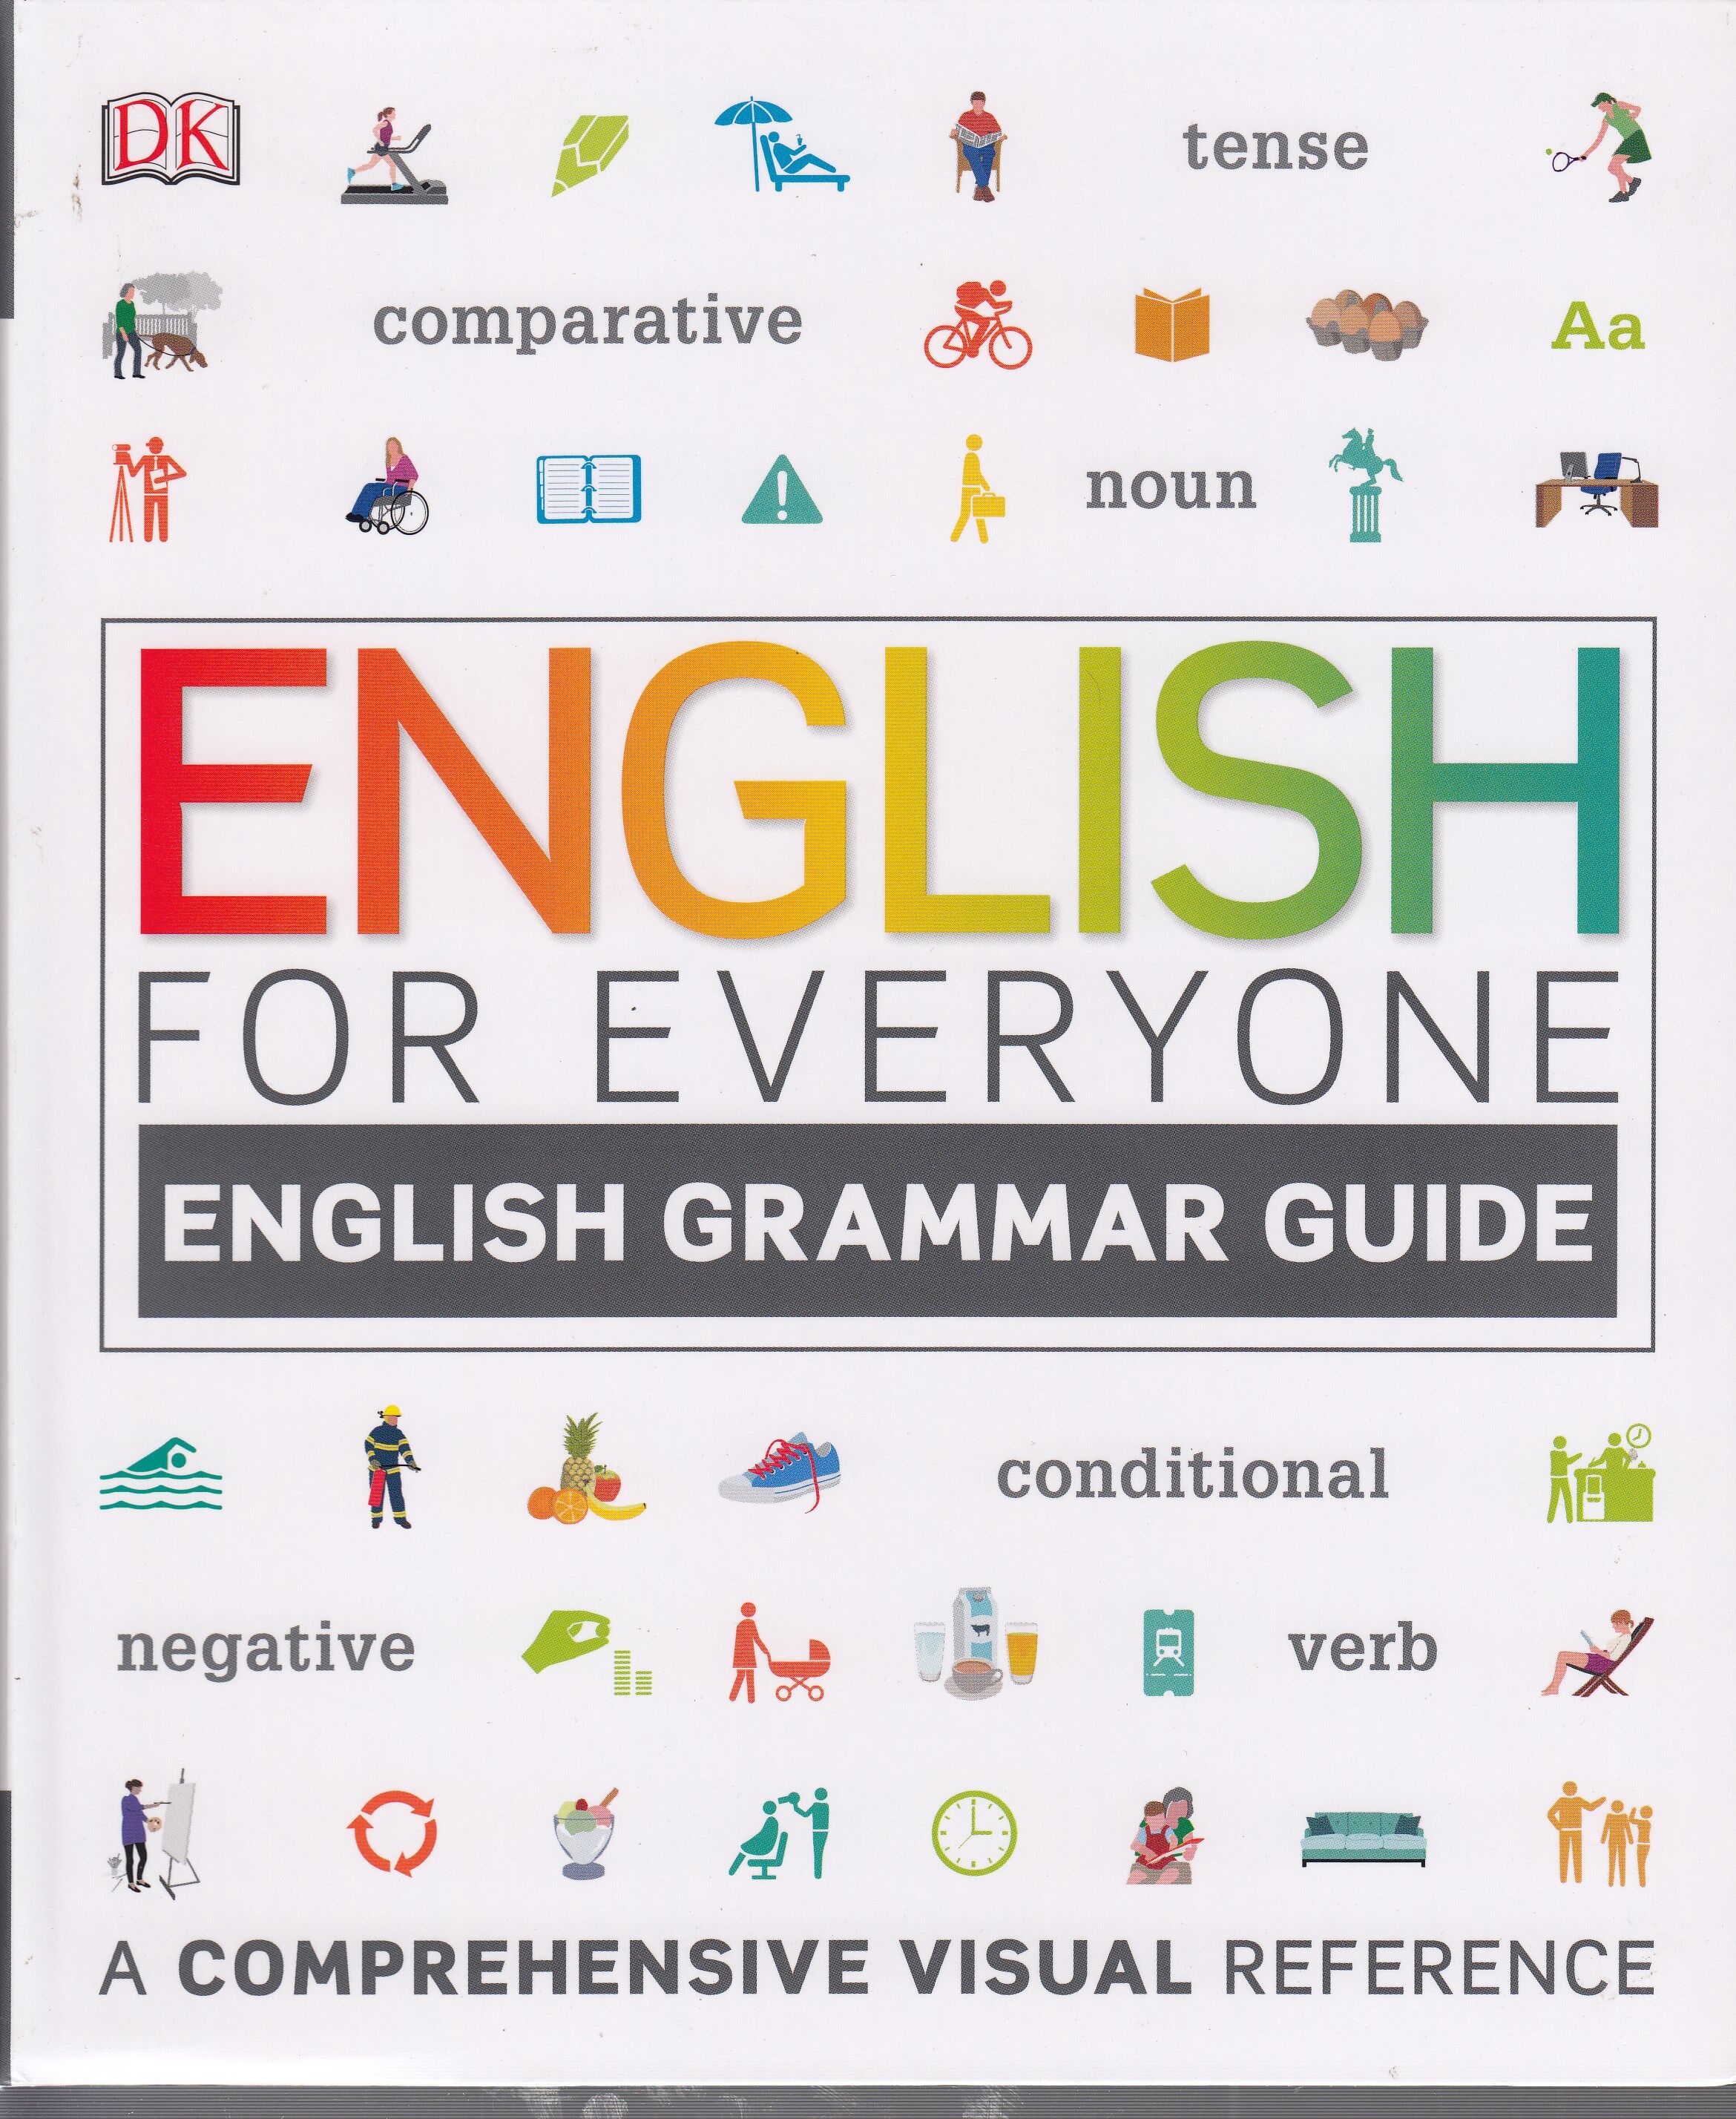 ENGLISH FOR EVERYONE ENG.GRAMMAR GUIDE by DK TODAY